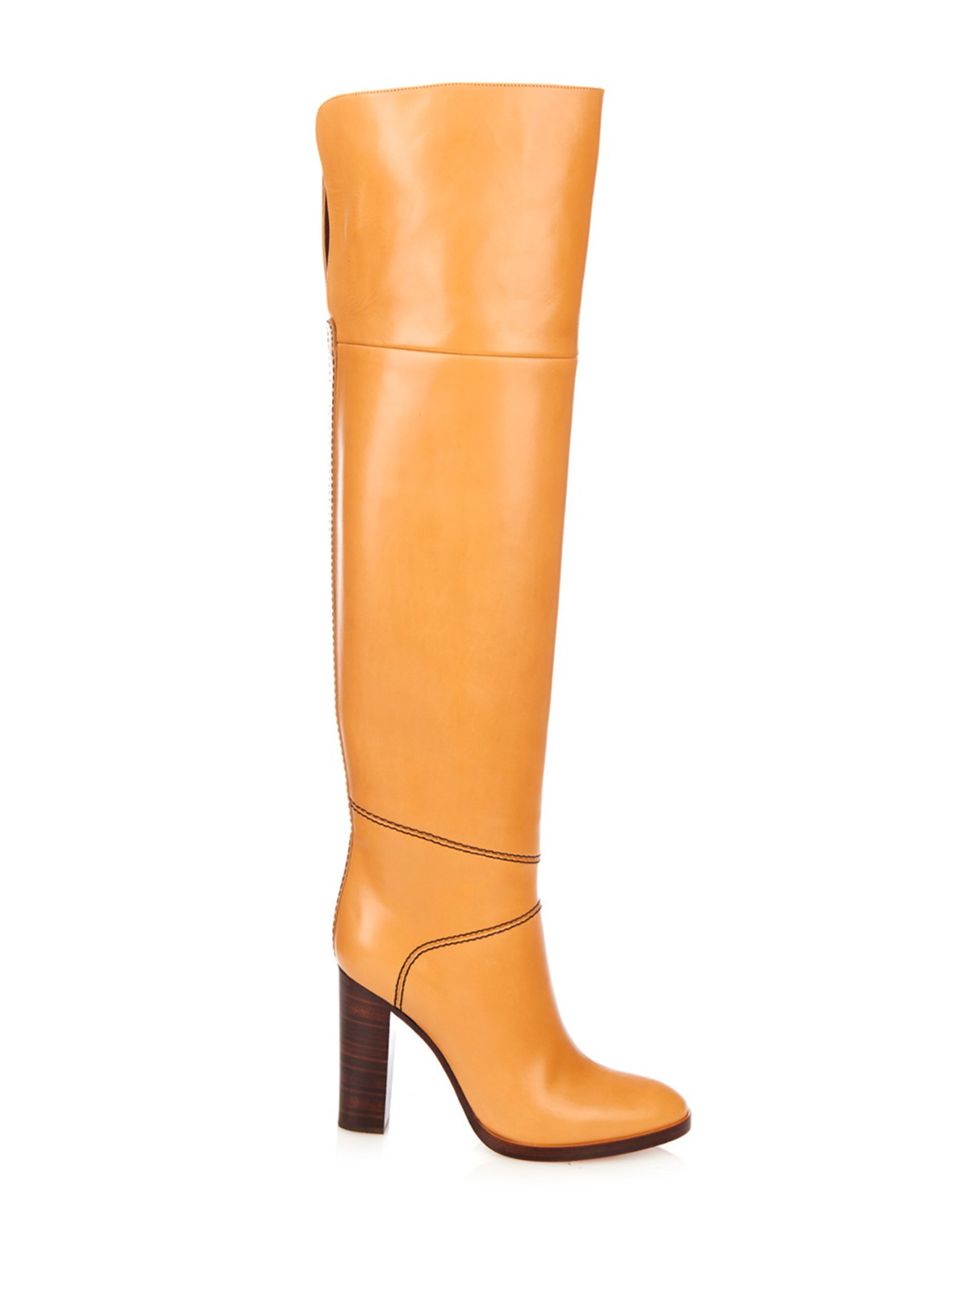 Footwear, Brown, Boot, Tan, Costume accessory, Leather, Liver, High heels, Foot, Beige, 